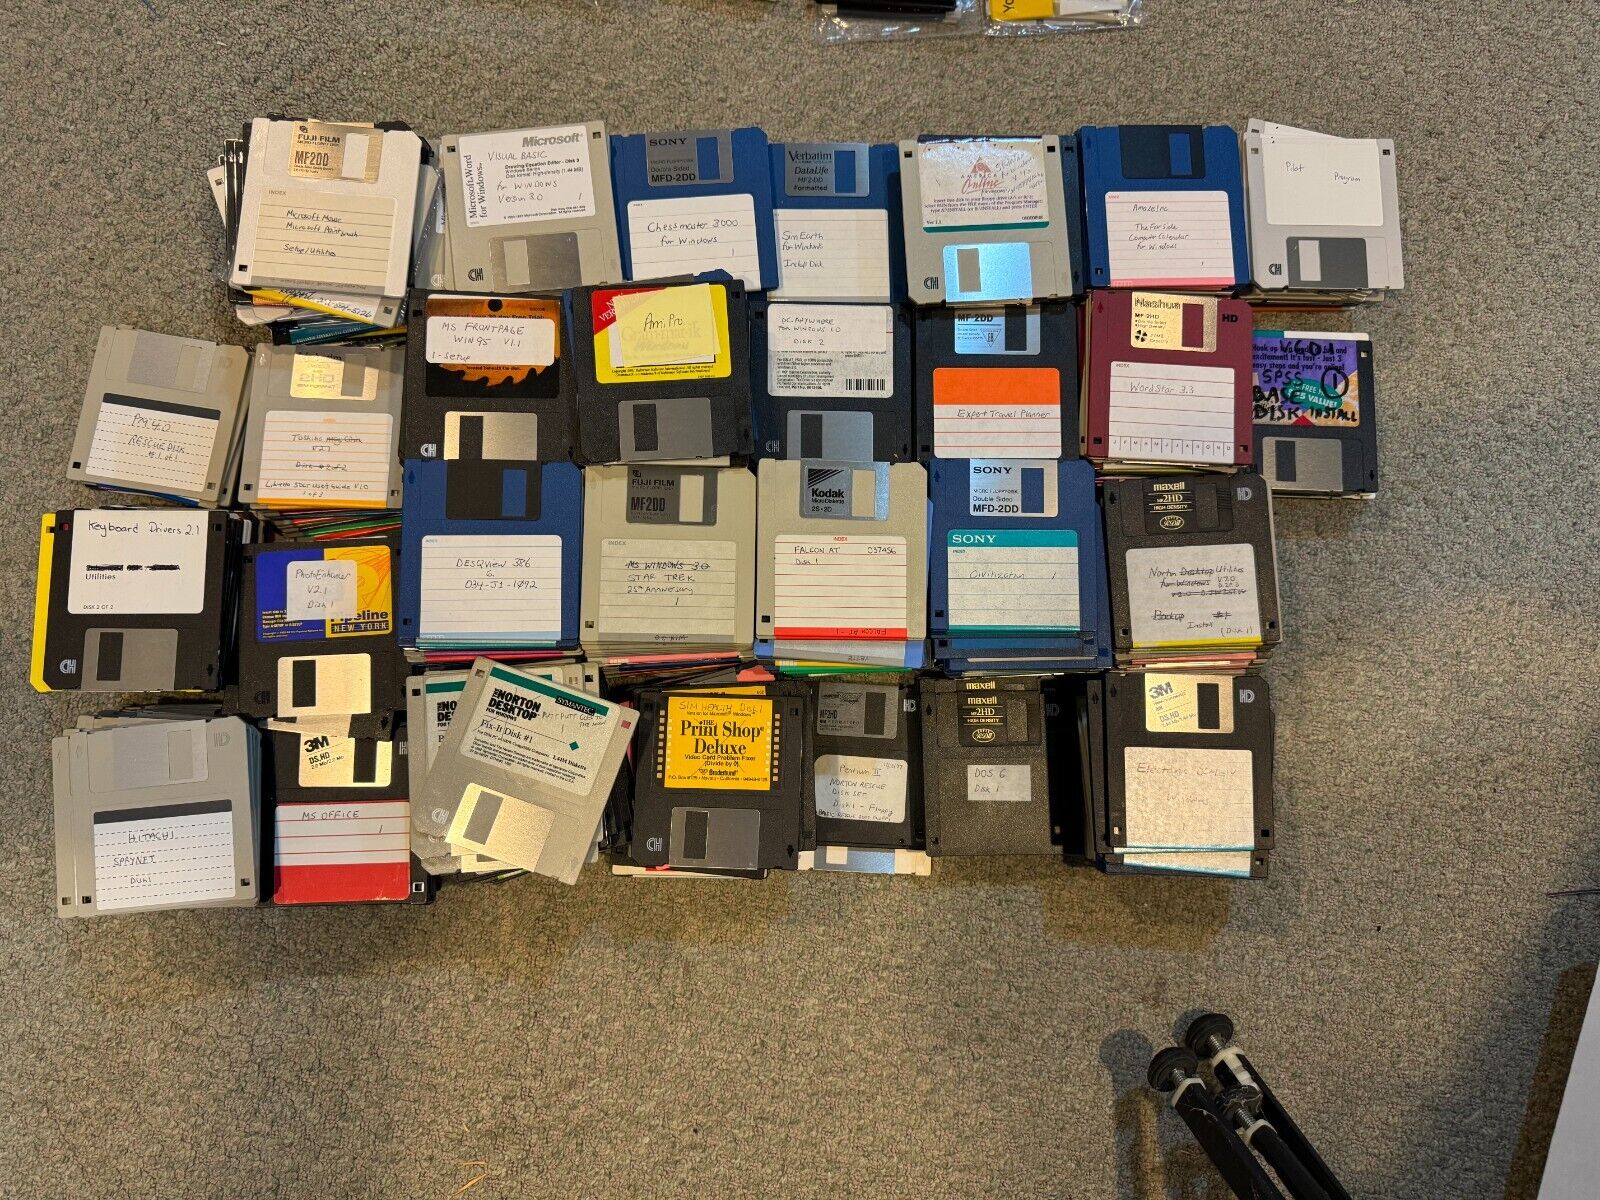 Massive Lot of Used 3.5 inch diskettes (500+) with my backups